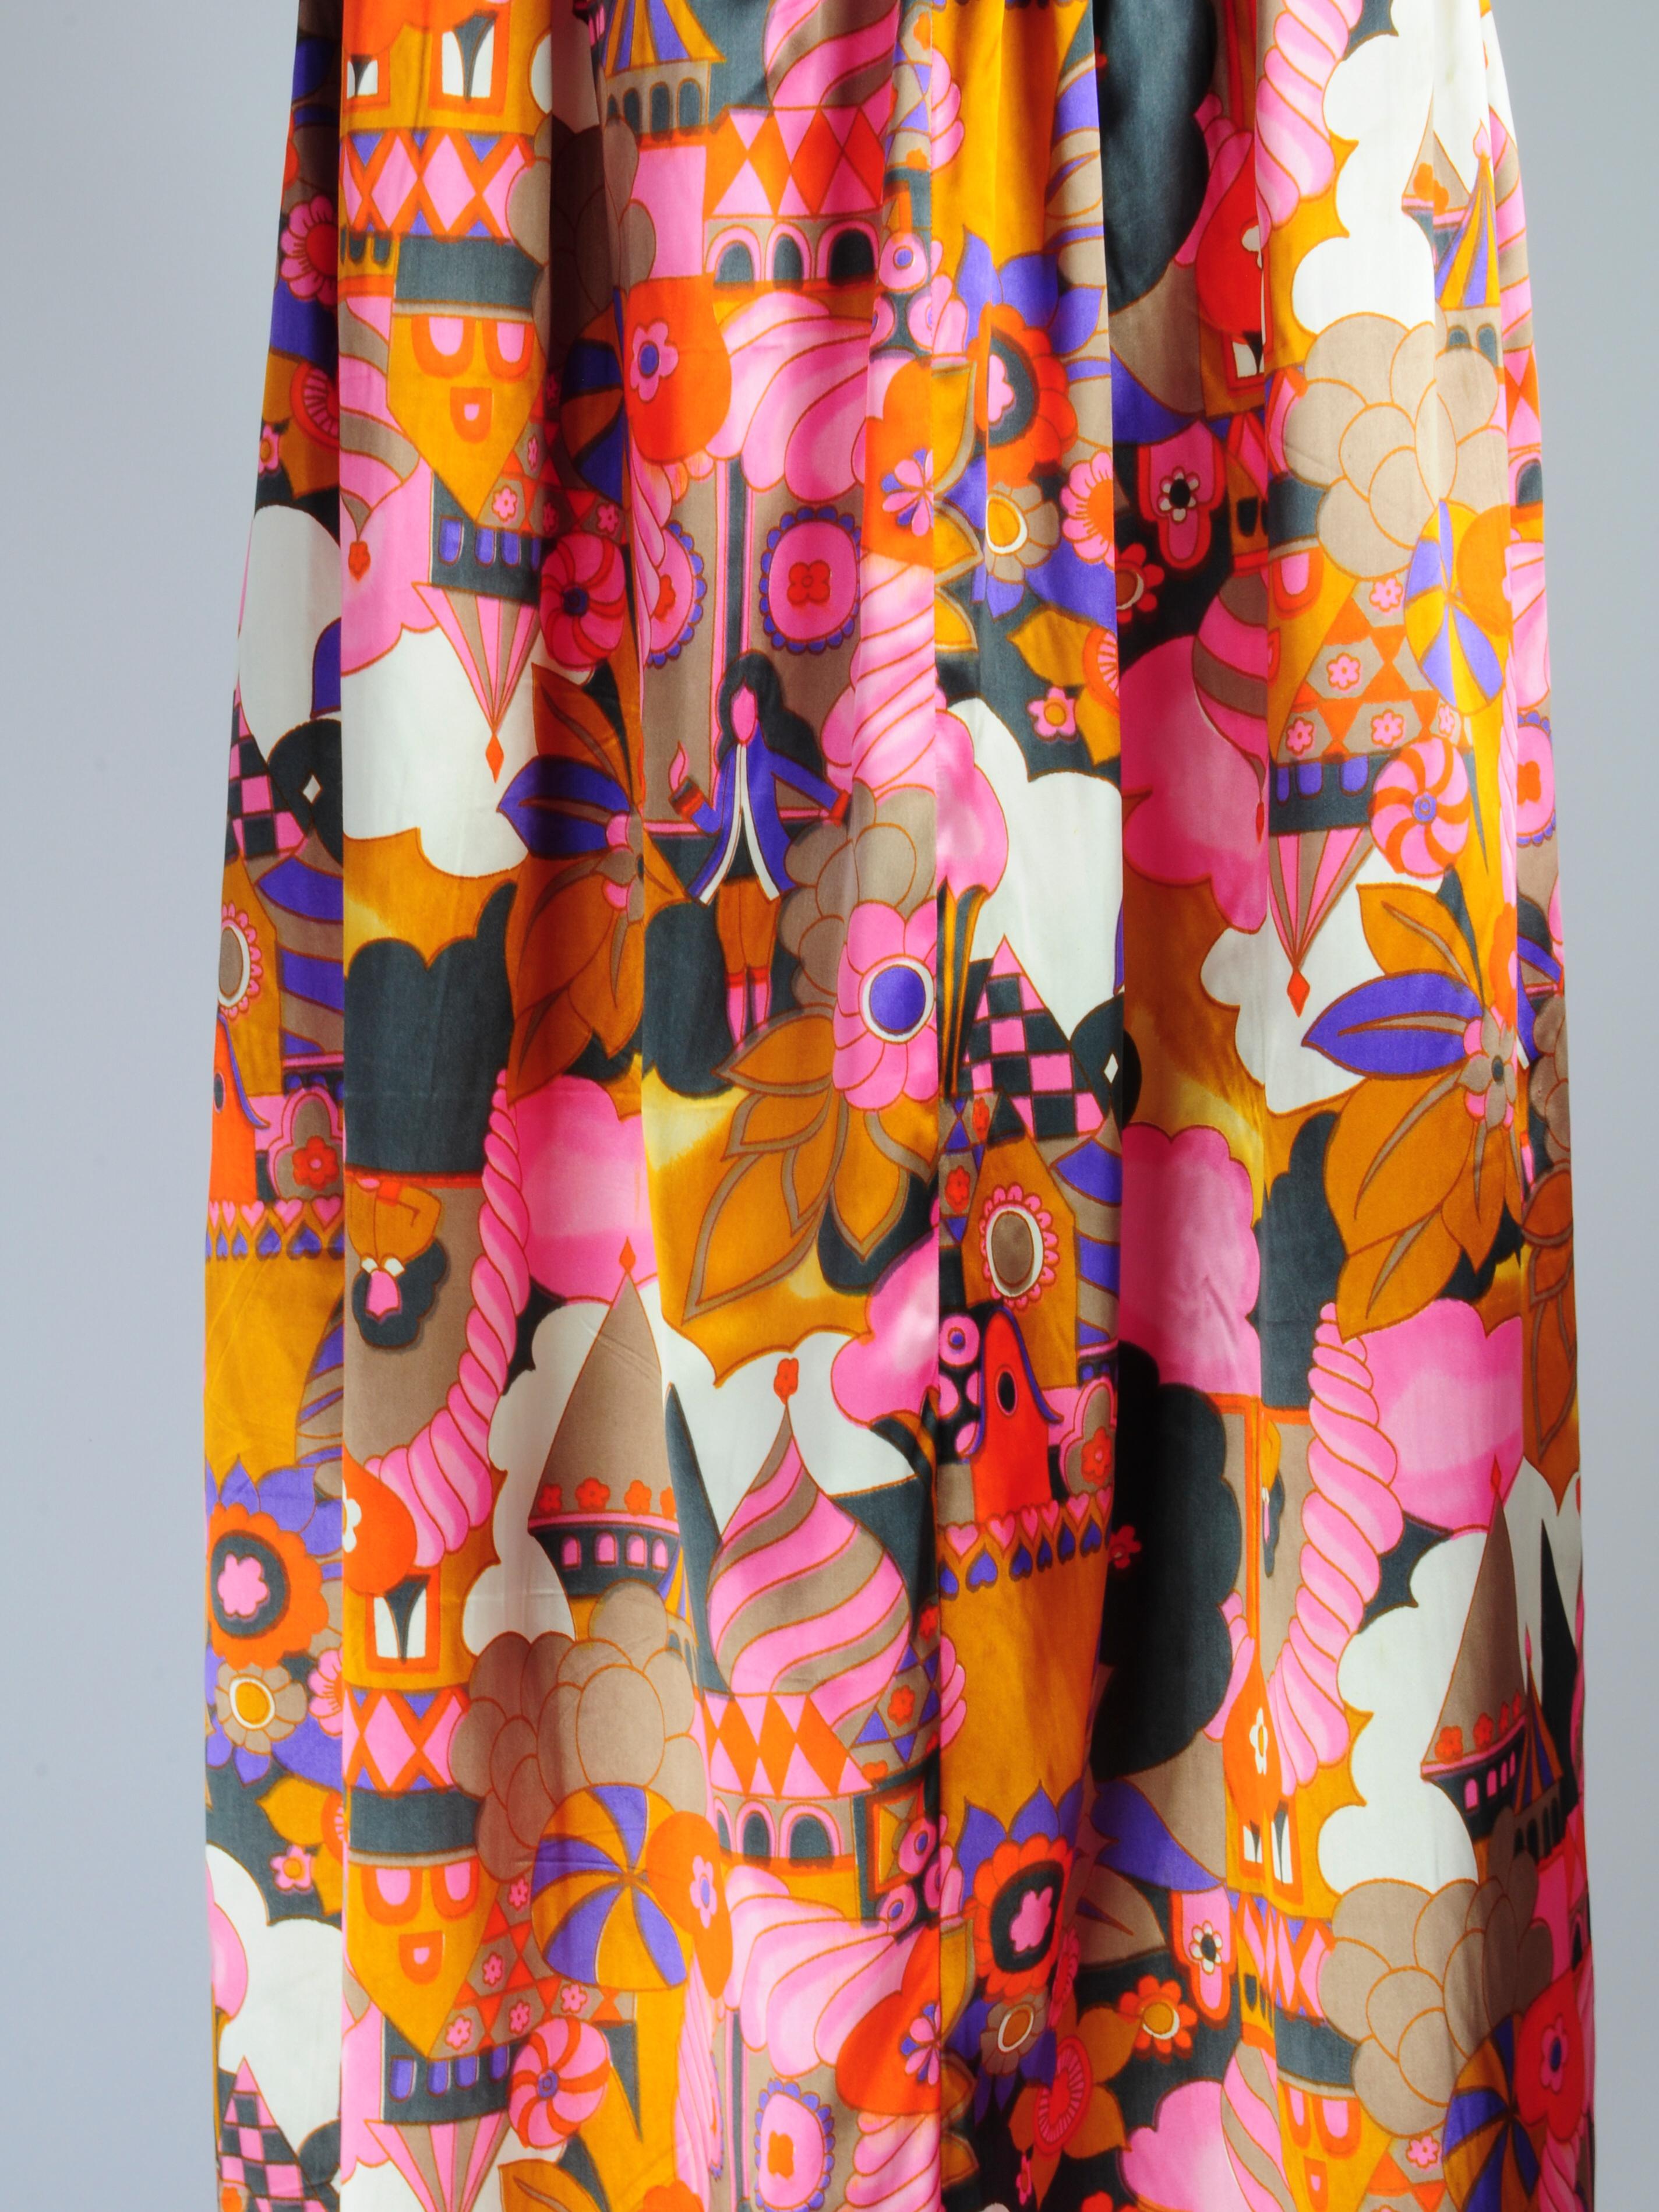 Vintage 1970s flower power printed maxi skirt with flowers, hearts, little figurines and Moskow Red Square depiction. A truly unique print and piece, never seen a similar 1970s print like this.
The skirt is handmade by someone, the construction